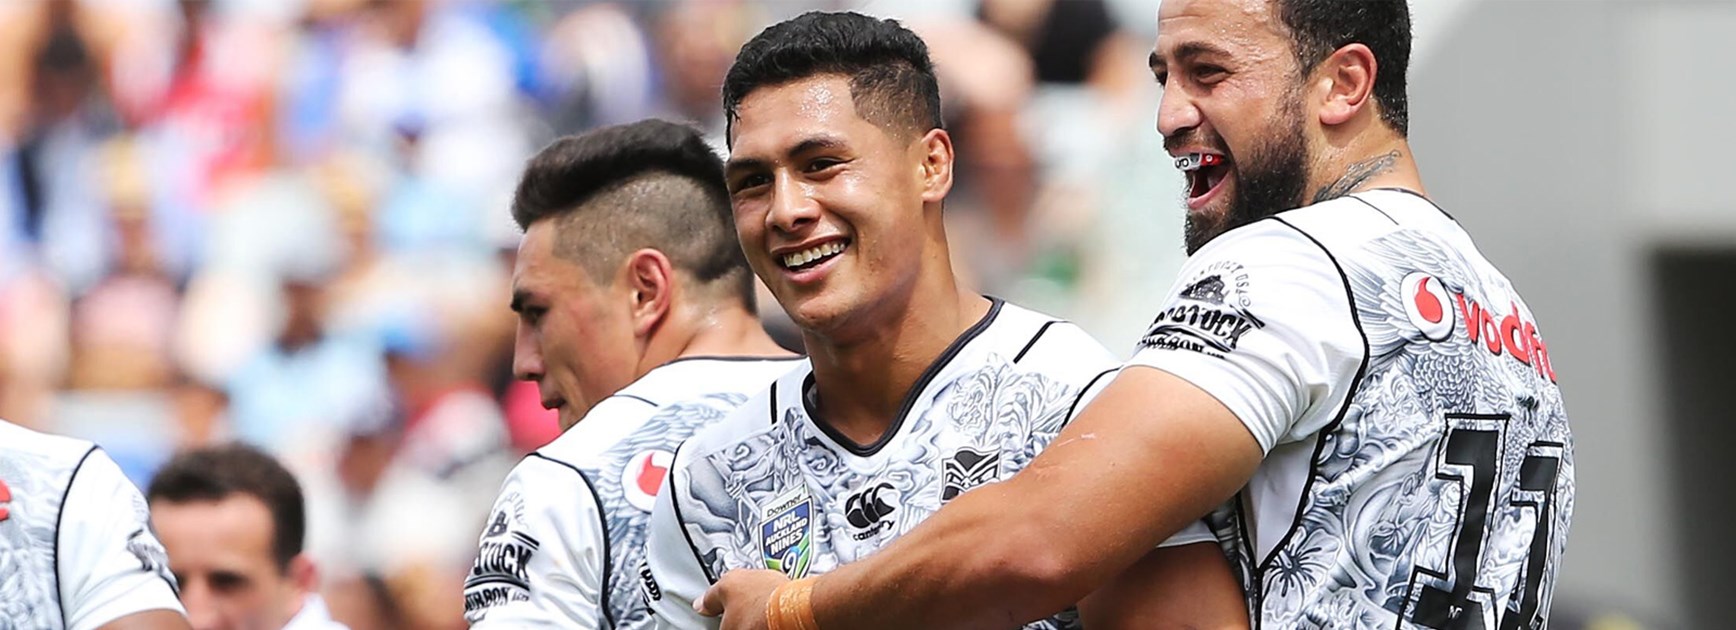 Roger Tuivasa-Sheck enjoyed a winning start to life as a Warriors at the Downer NRL Auckland Nines.